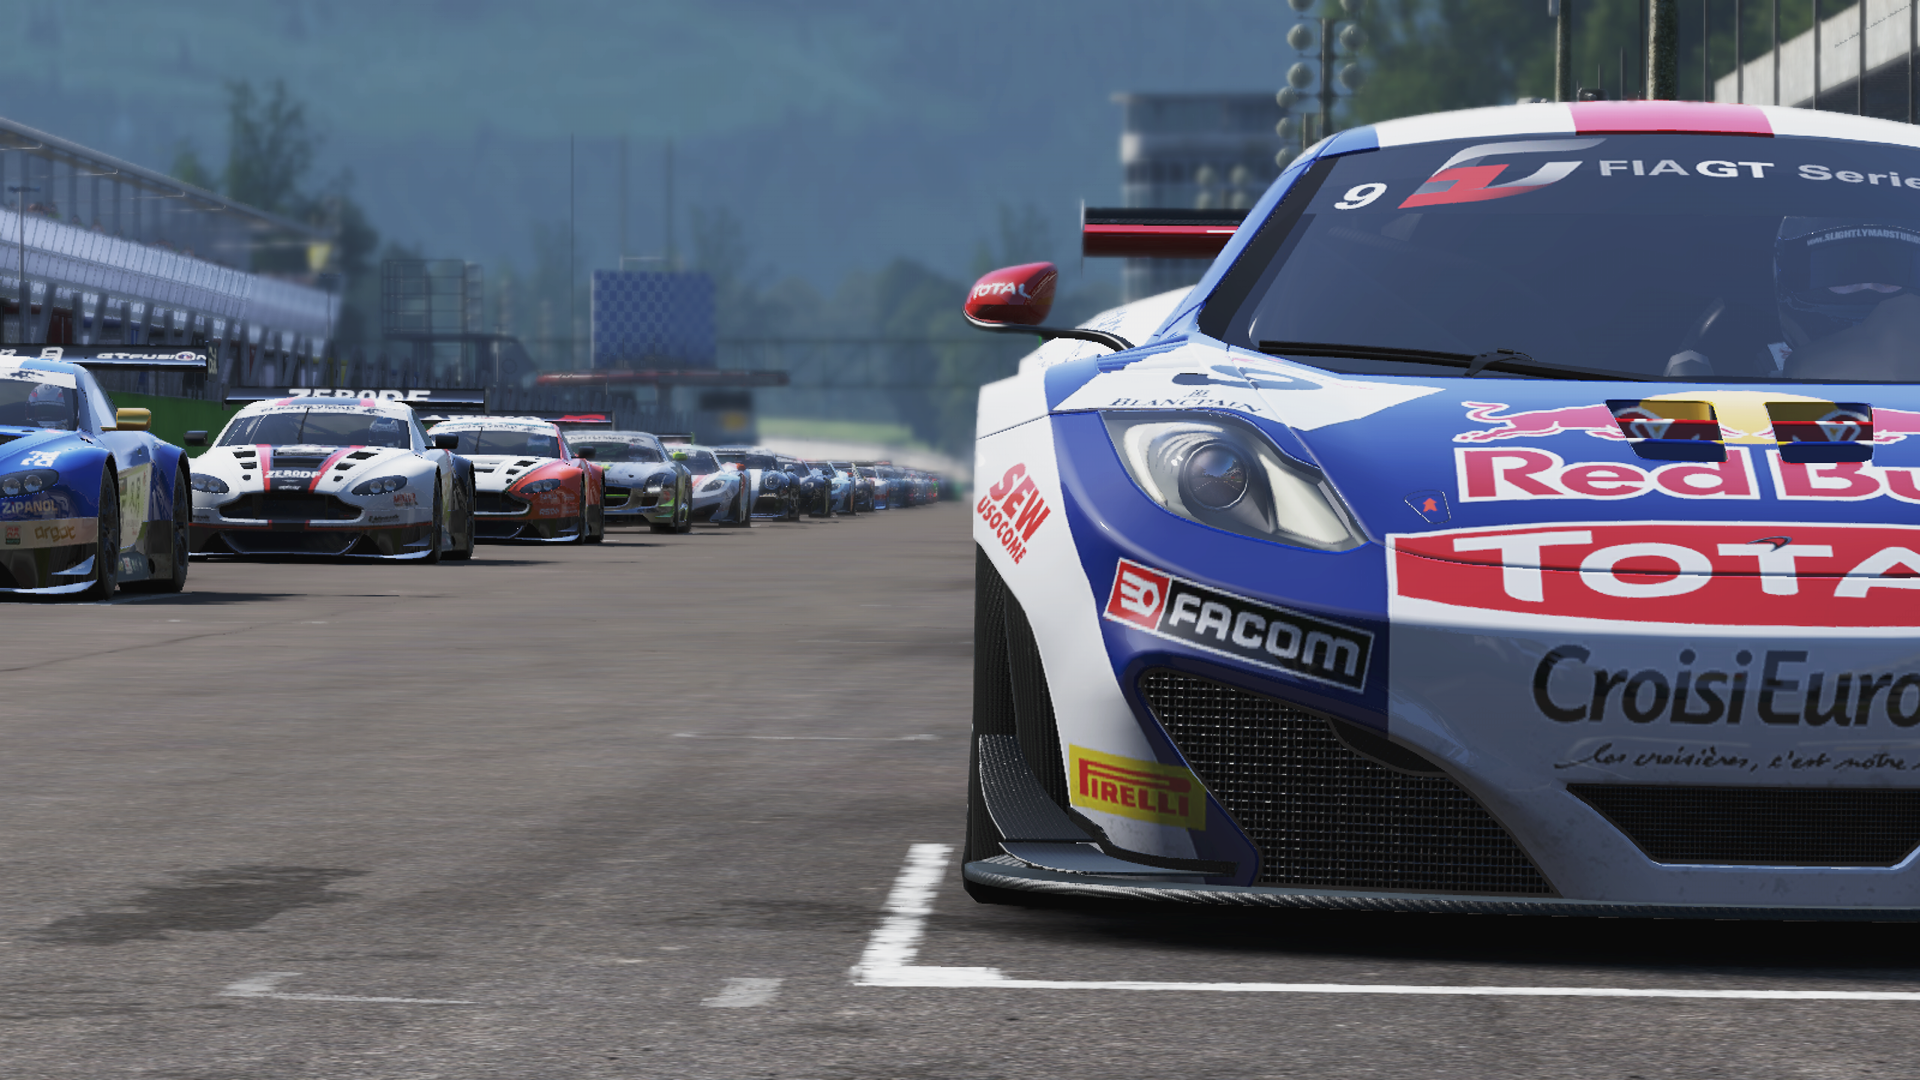 project cars review image 3